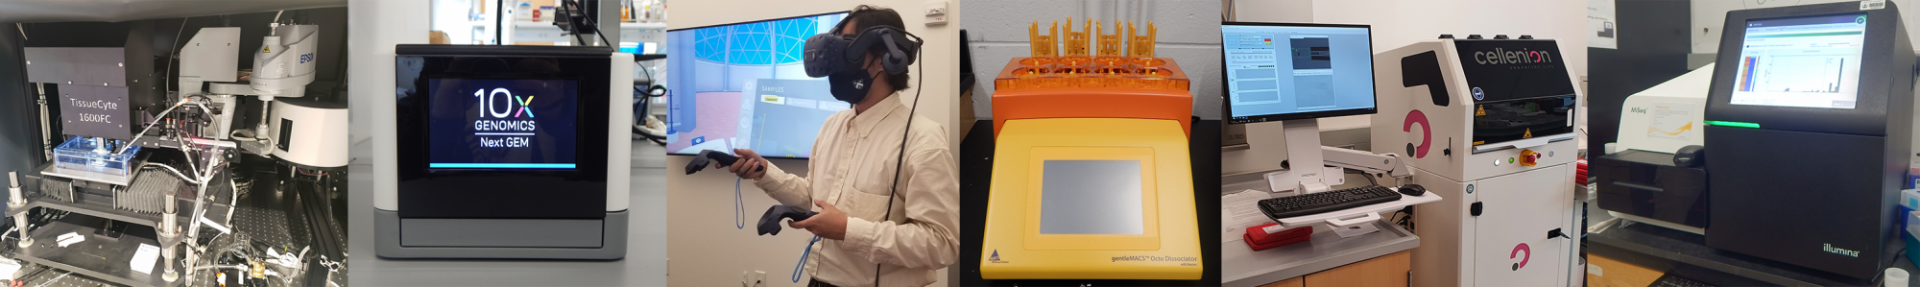 From left to right, pictures of serial two-photon tomography system, 10X chromium system, a researcher using VR, tissue dissociator, DLP+, and MiSeq DNA sequencer.